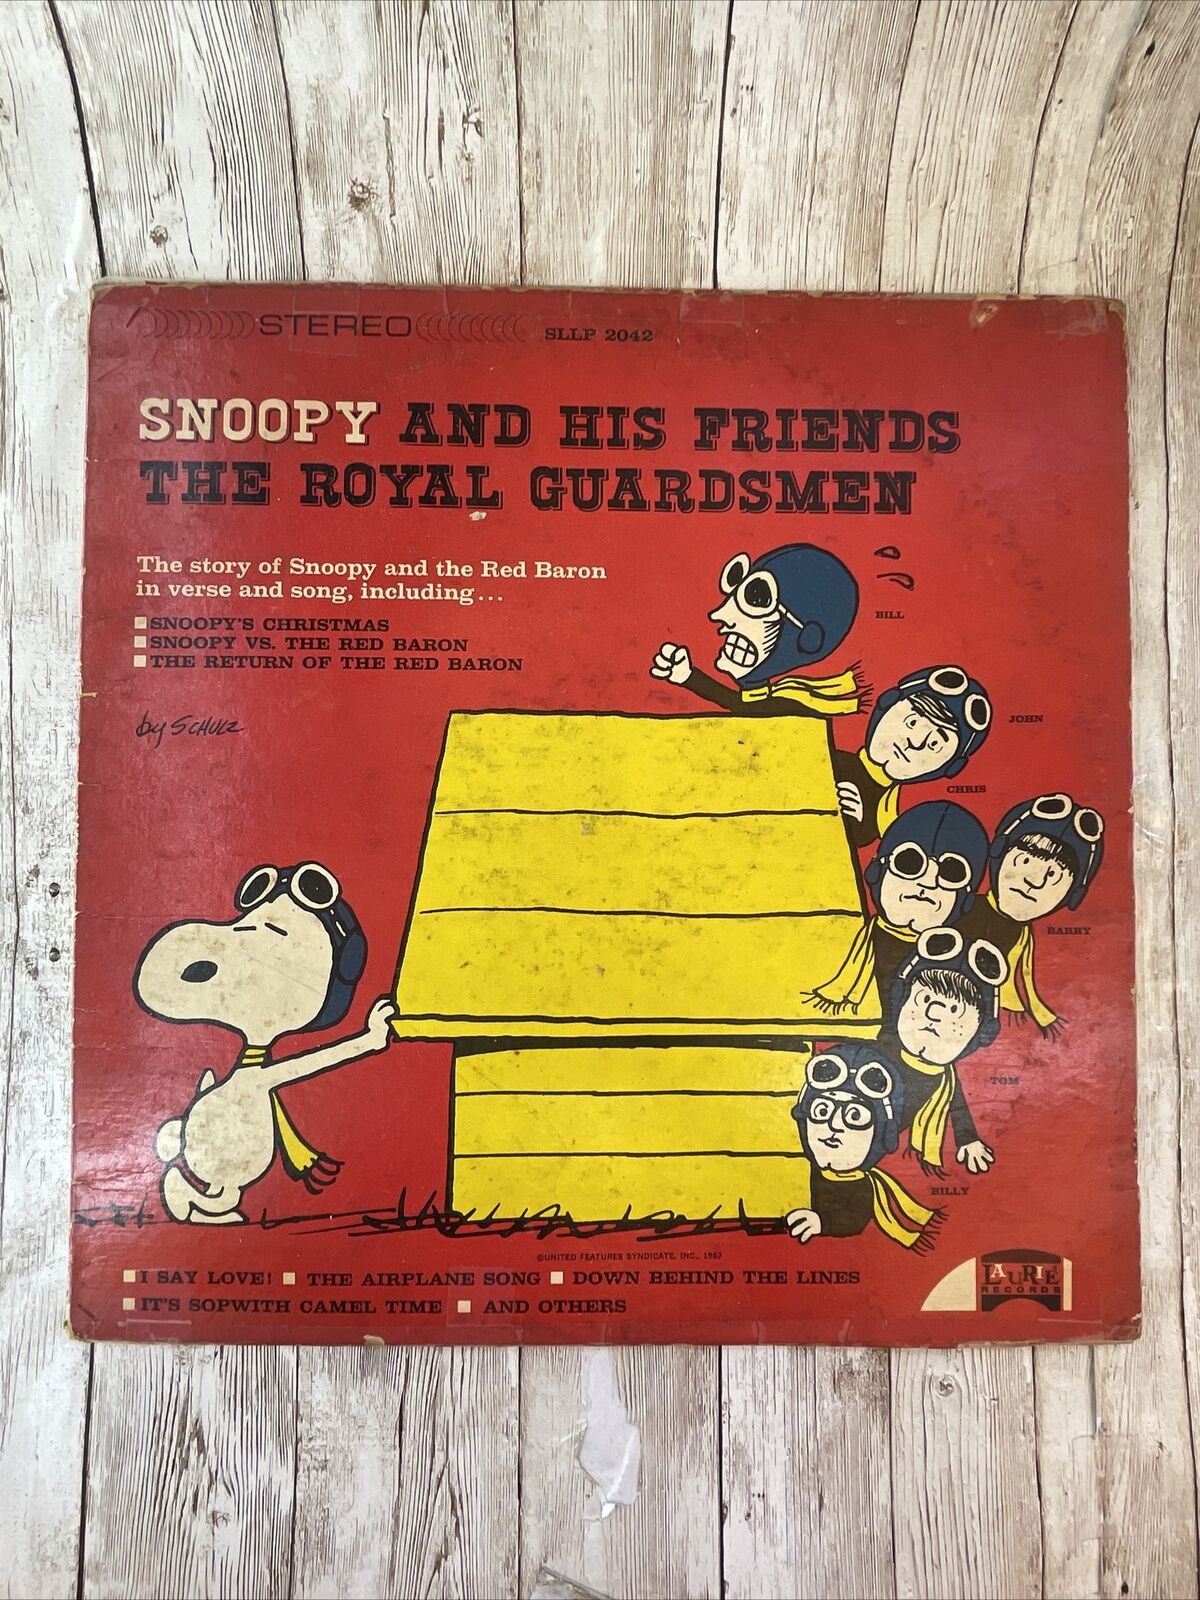 The Royal Guardsmen - Snoopy And His Friends - 1967 LP STEREO SLLP 2042 VINYL